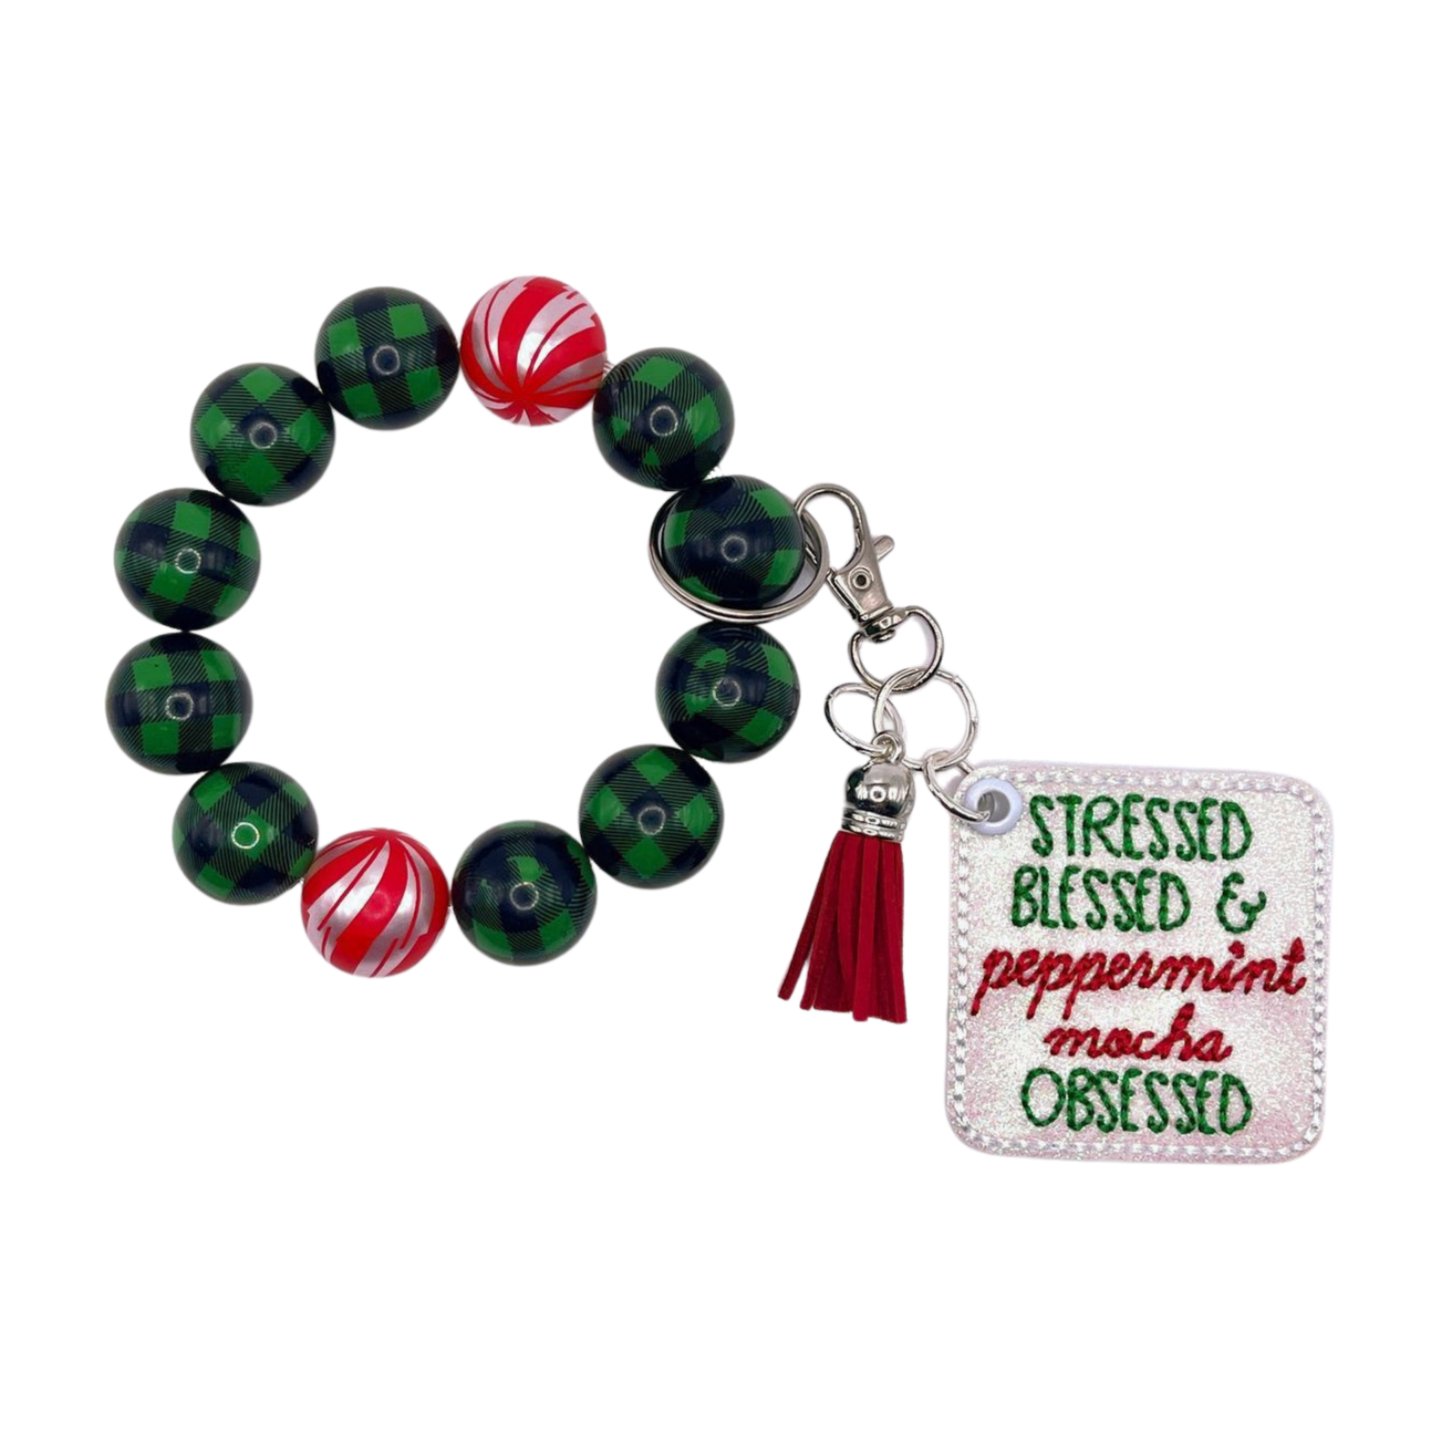 Peppermint Mocha Obsessed Keychain and Beaded Wristlet